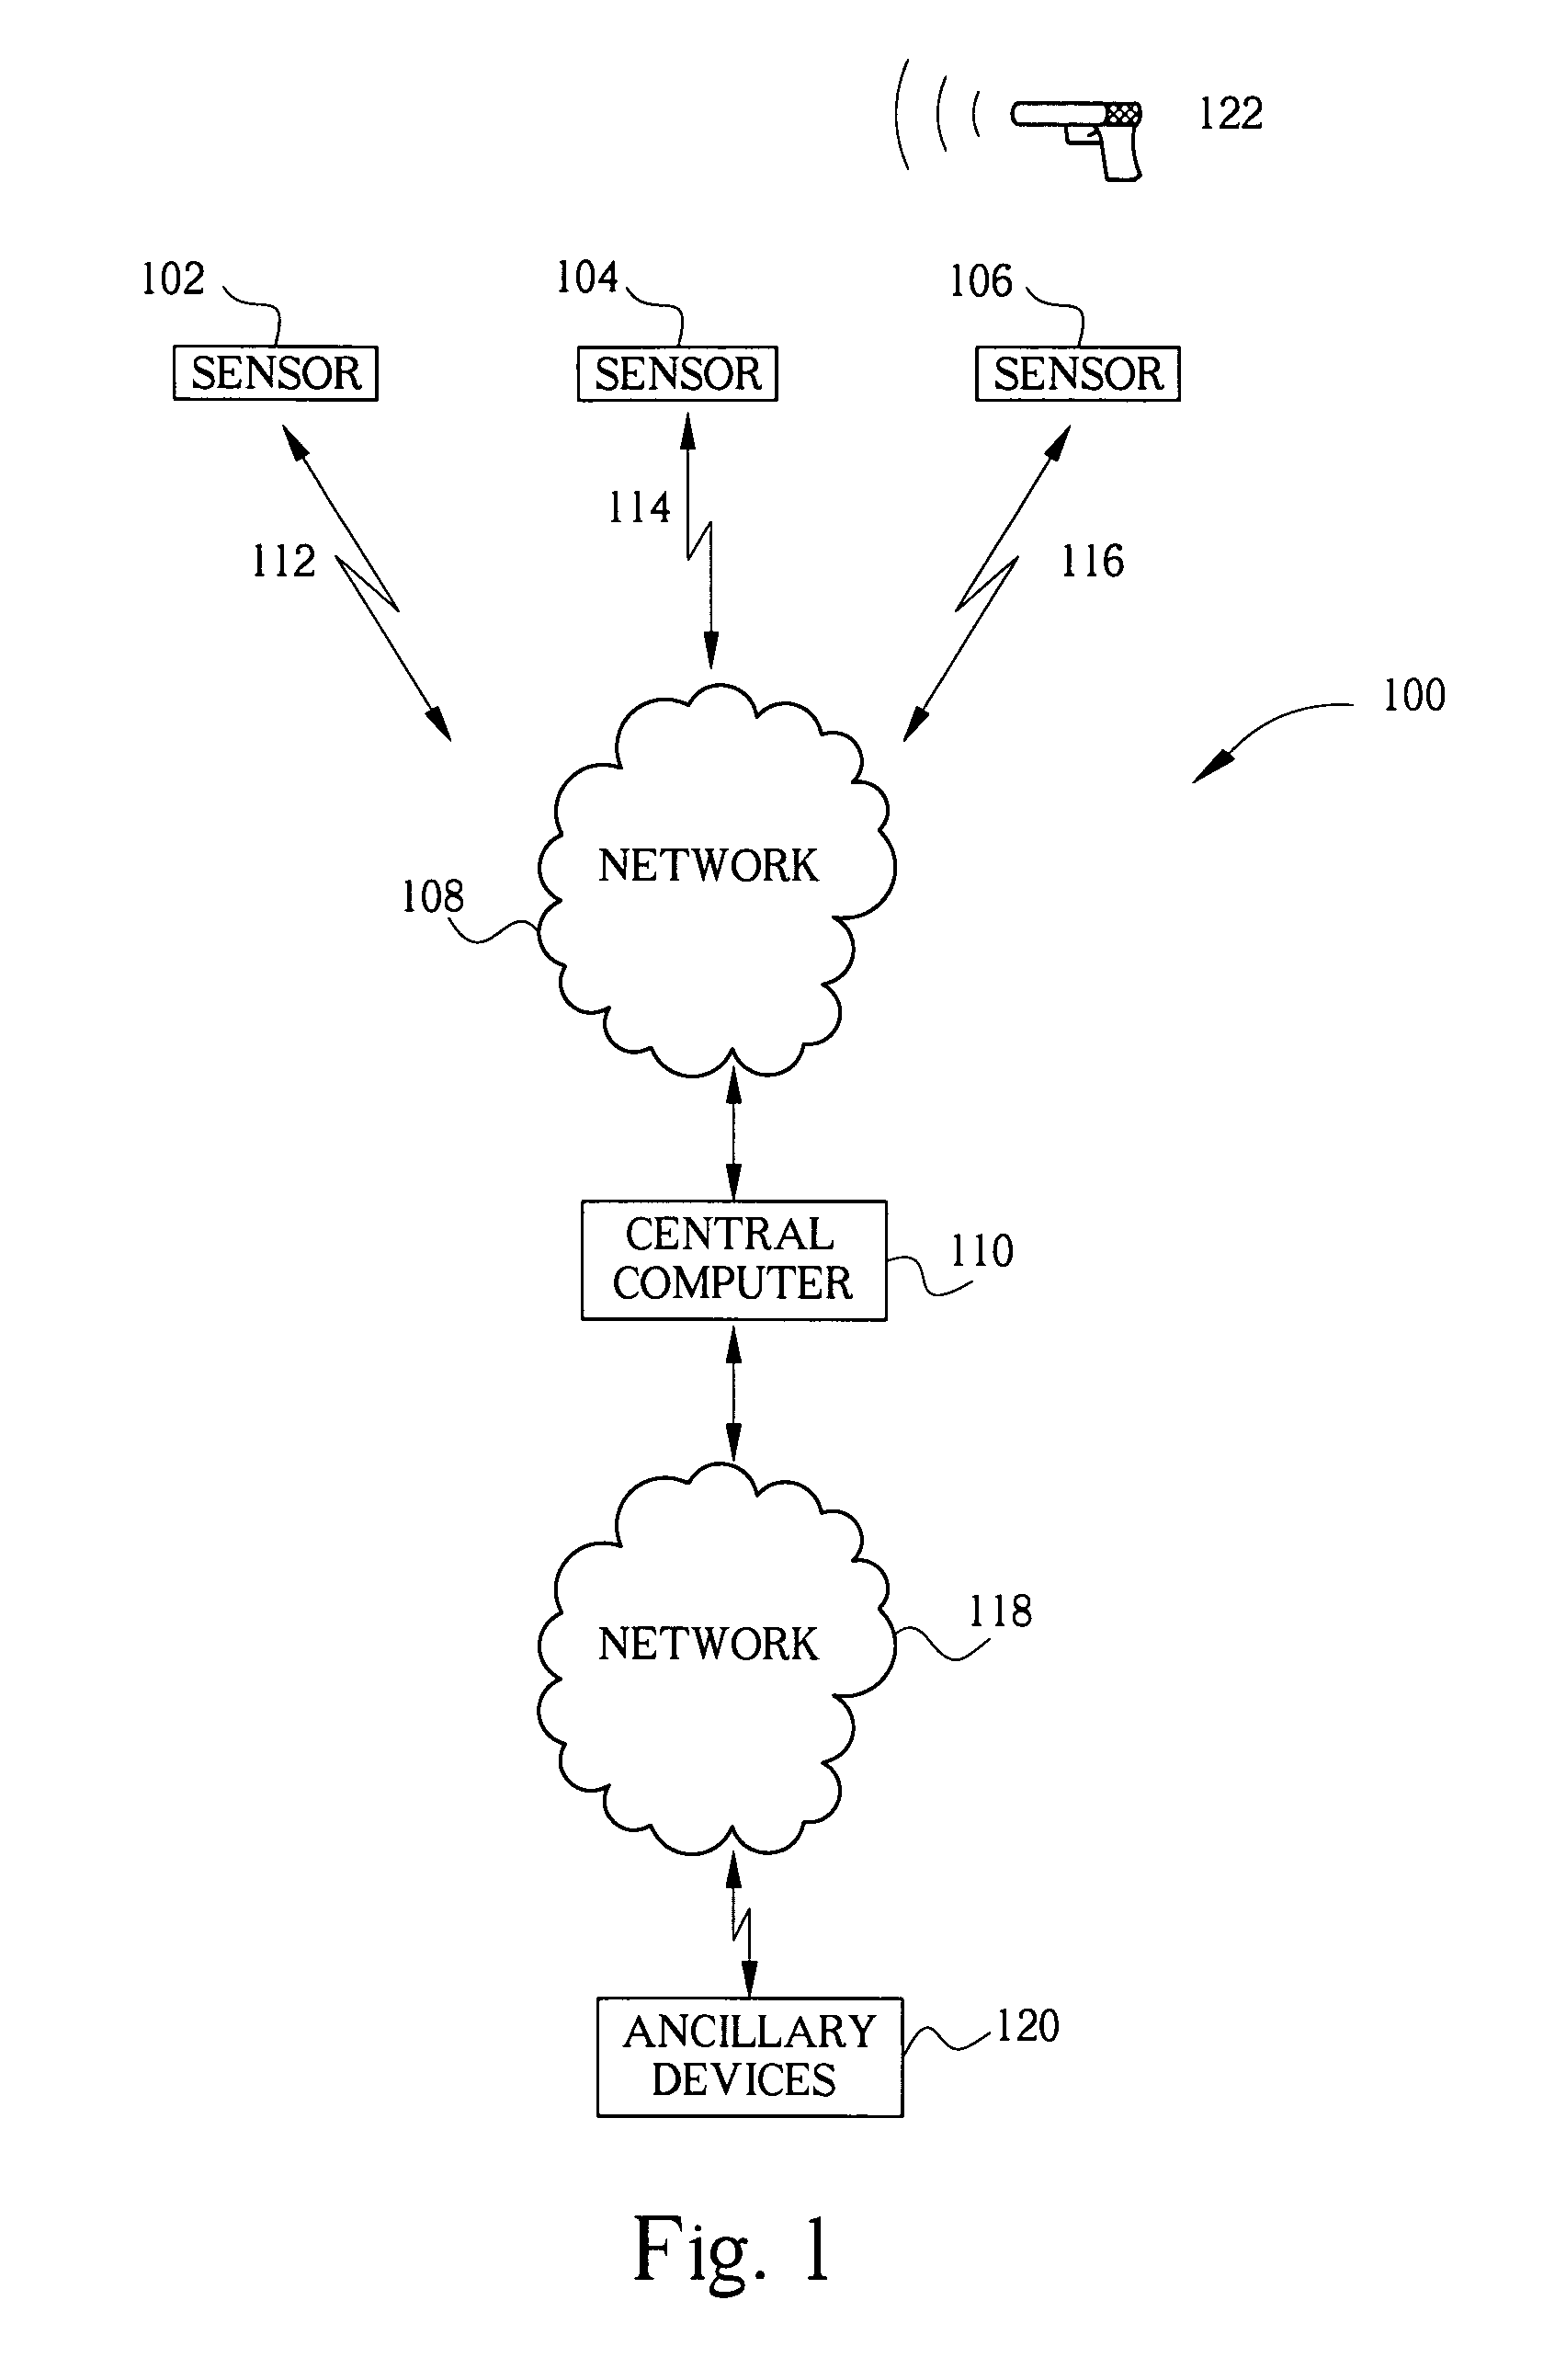 System and method for archiving data from a sensor array